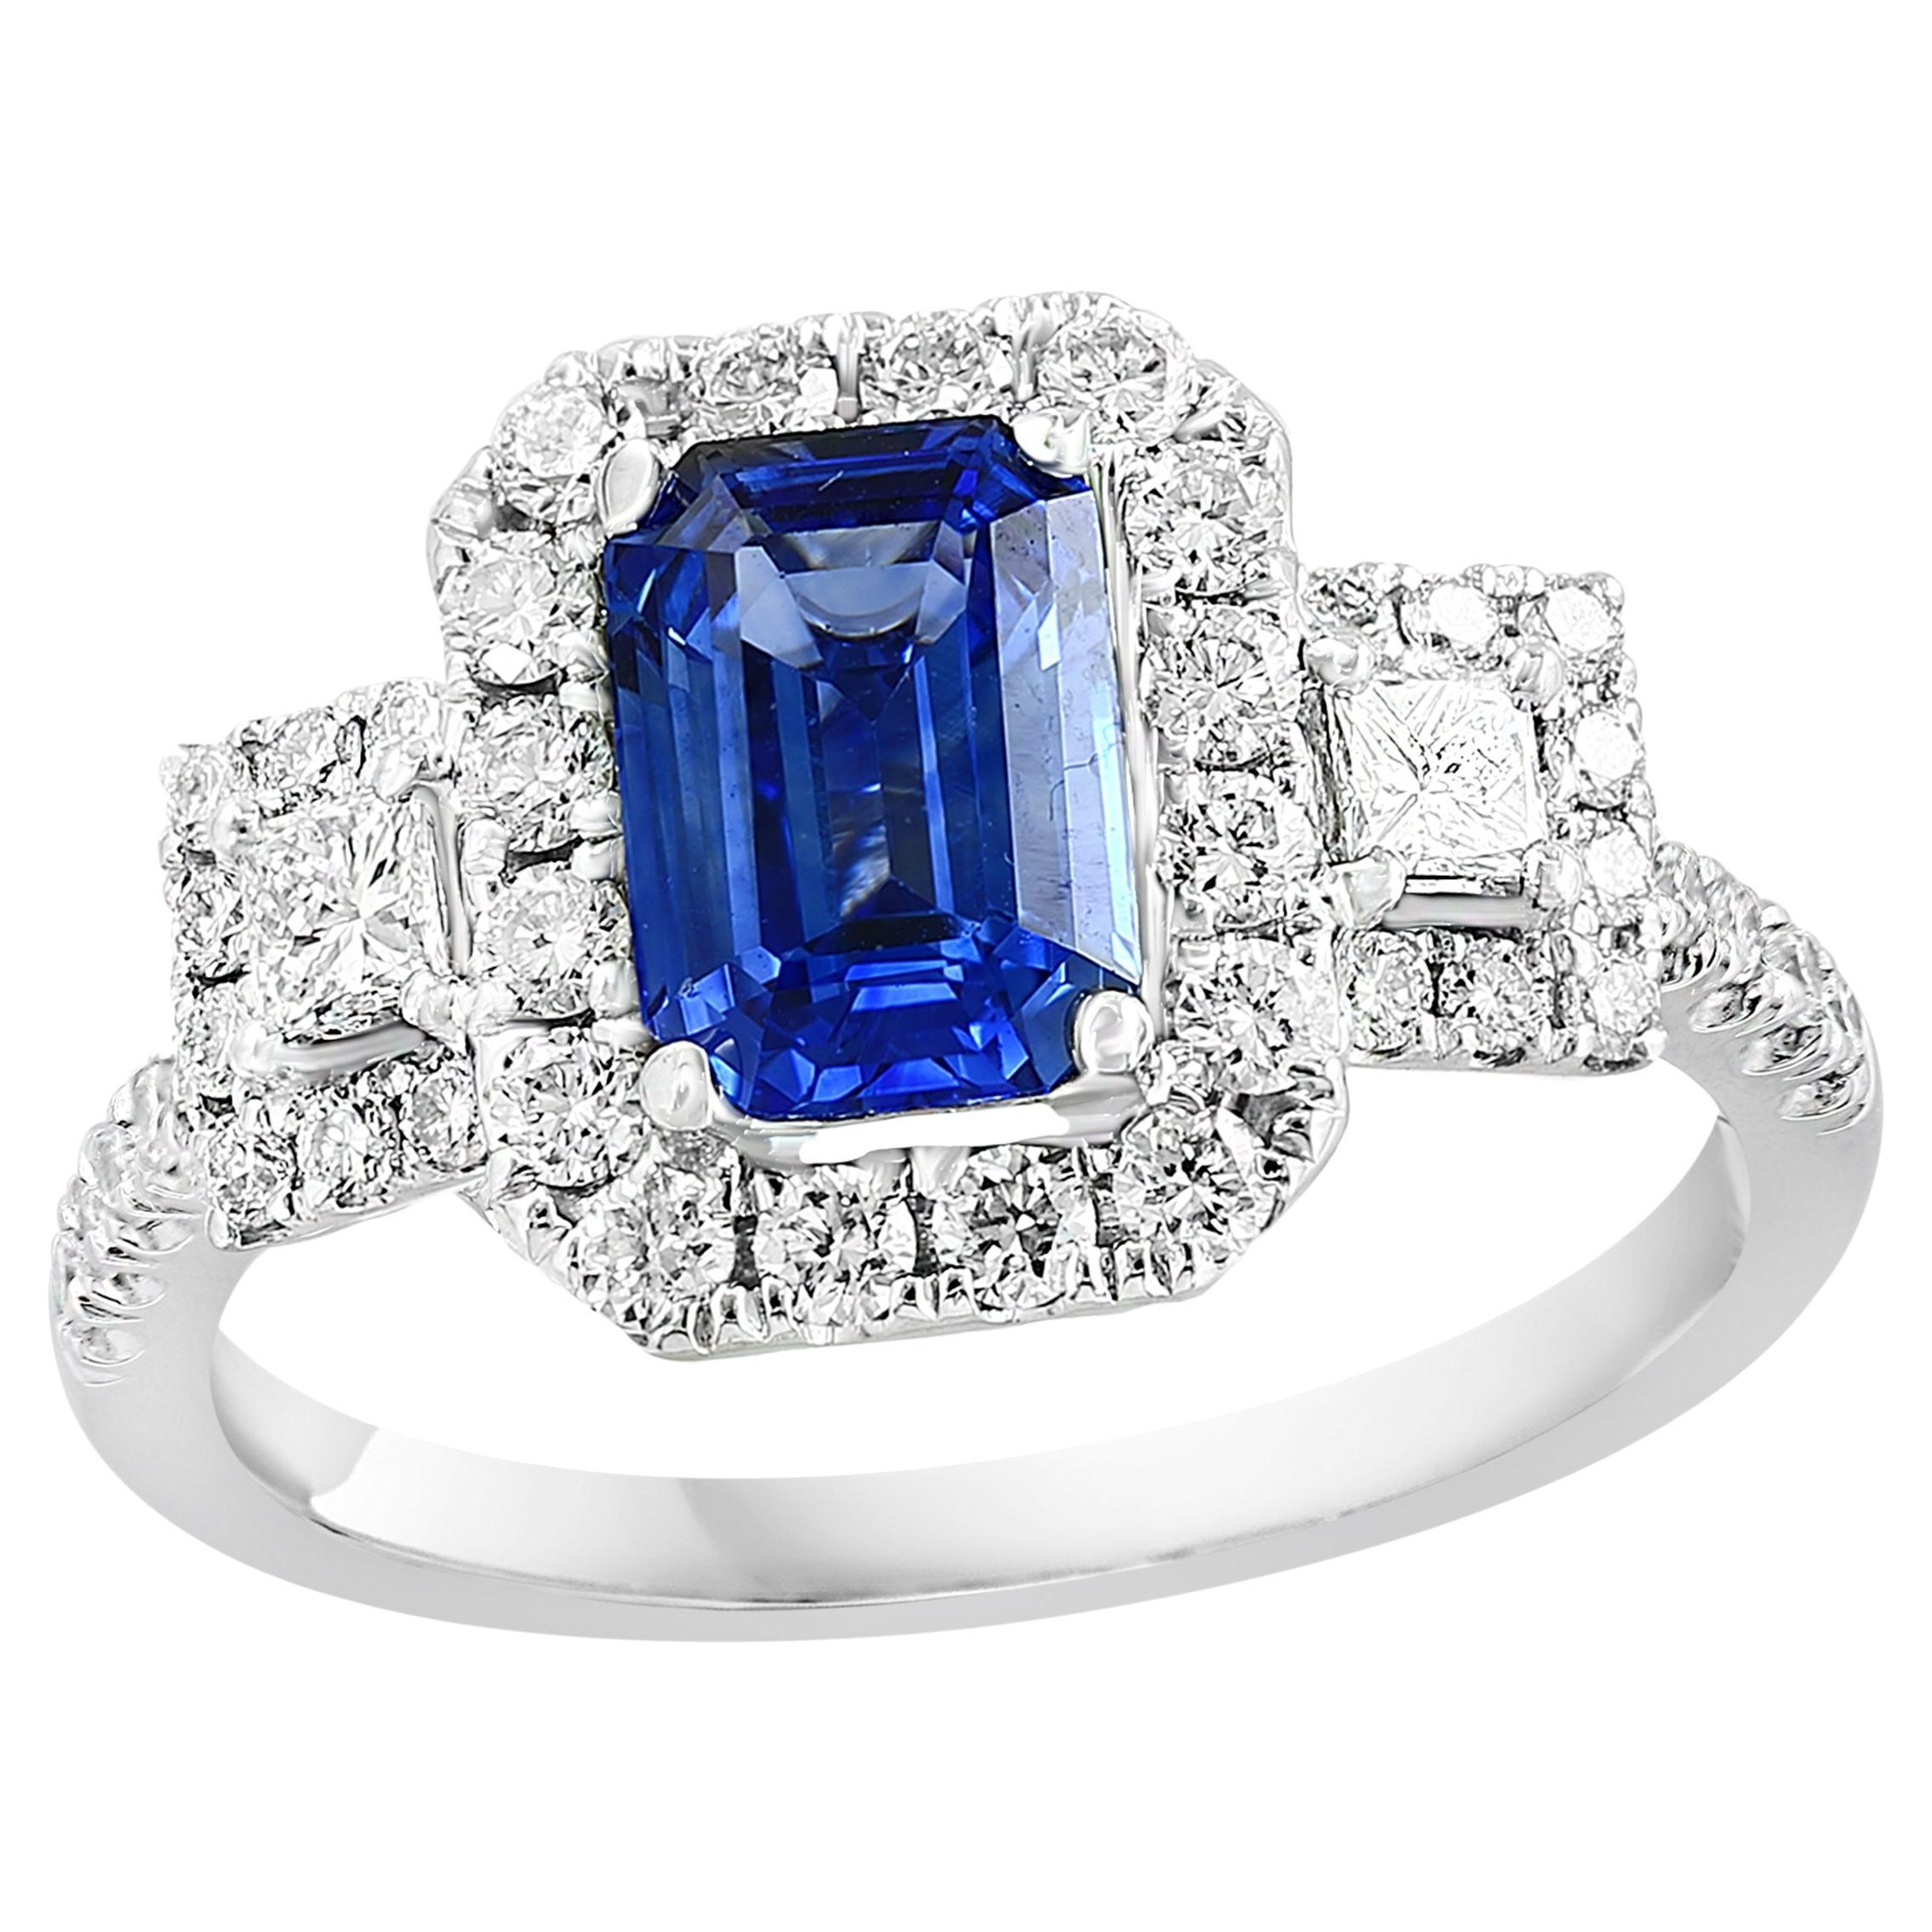 1.14 Carat Emerald Cut Sapphire and Diamond Halo Ring in 18K White Gold For Sale